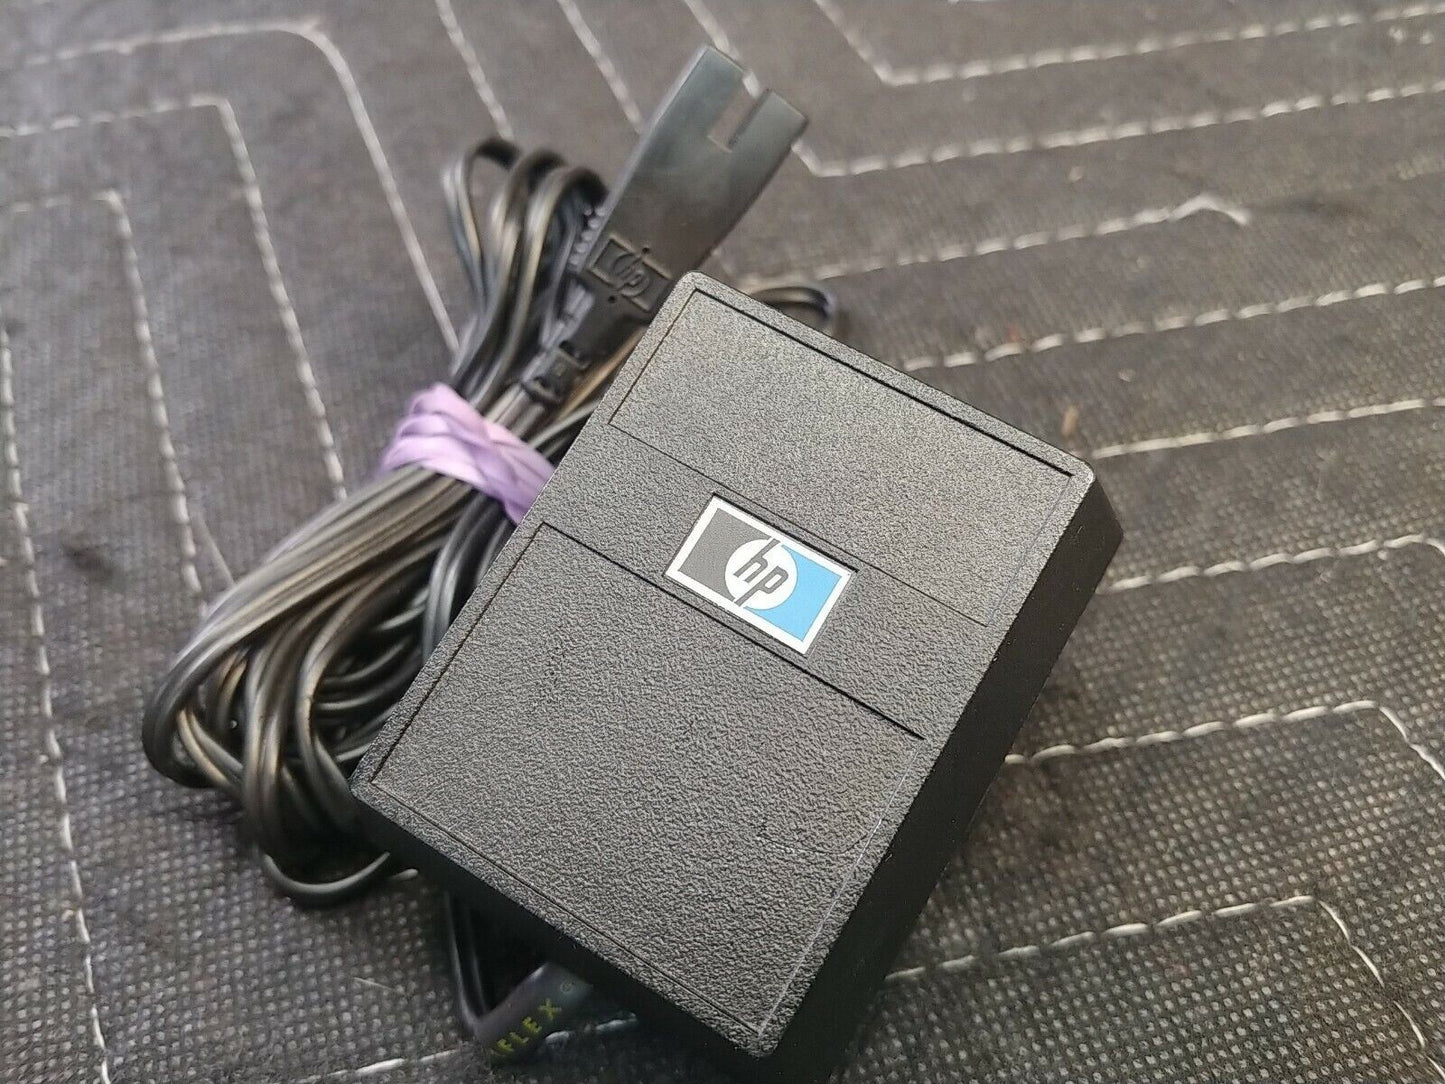 HP 82059B RARE BATTERY CHARGER AC/DC ADAPTER in BOX - FITS HP- 10 19C HP-97